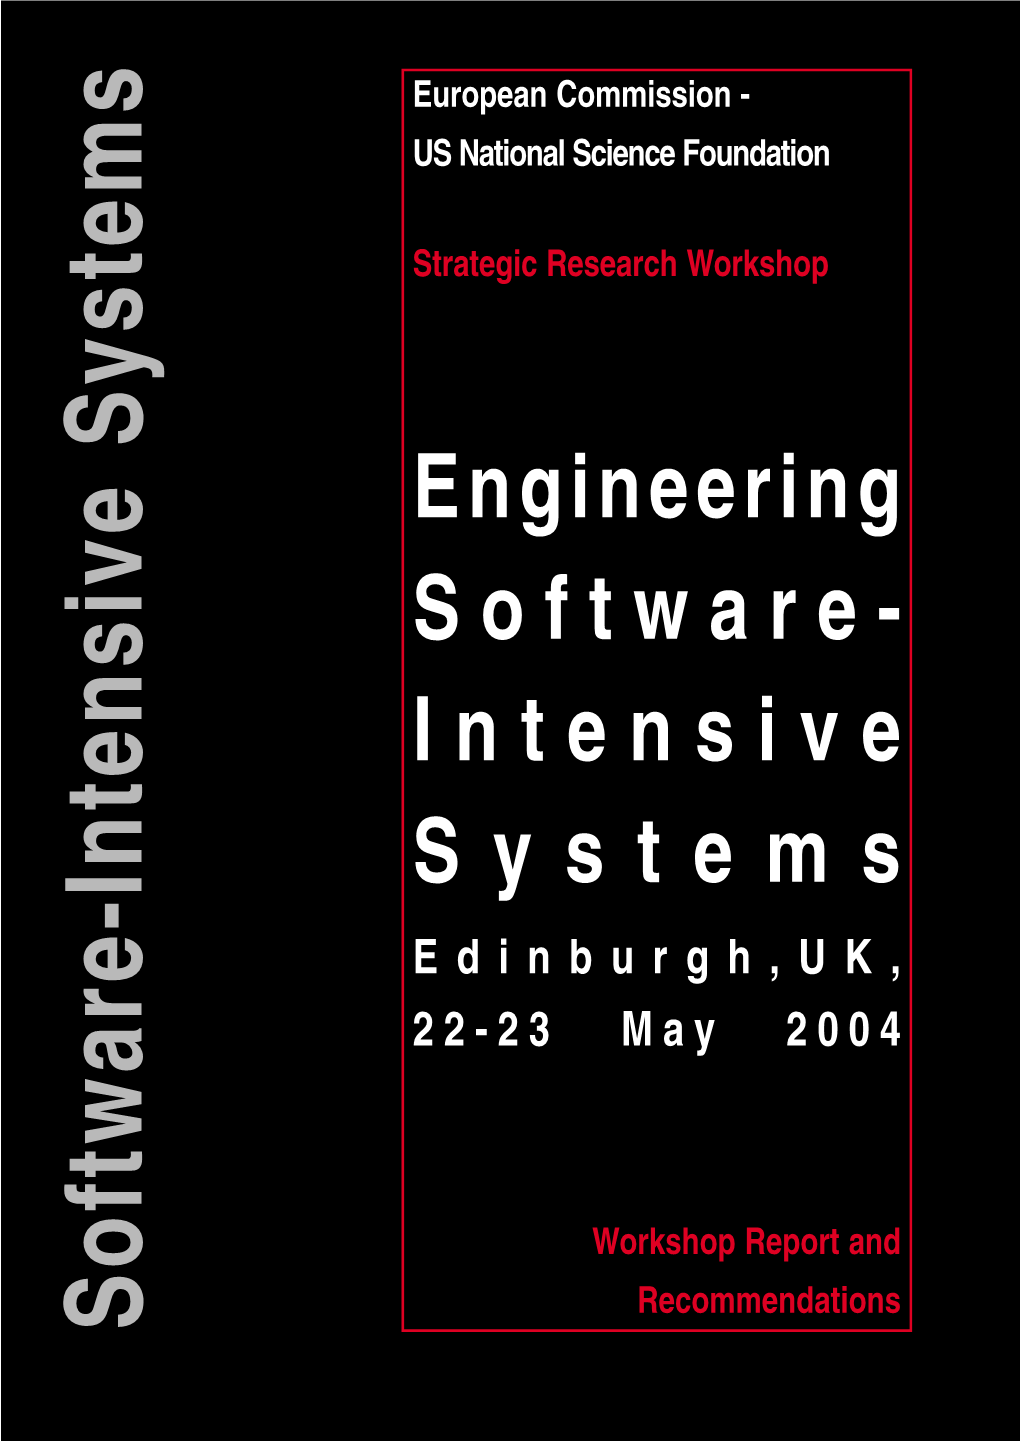 Engineering Software- Intensive Systems”